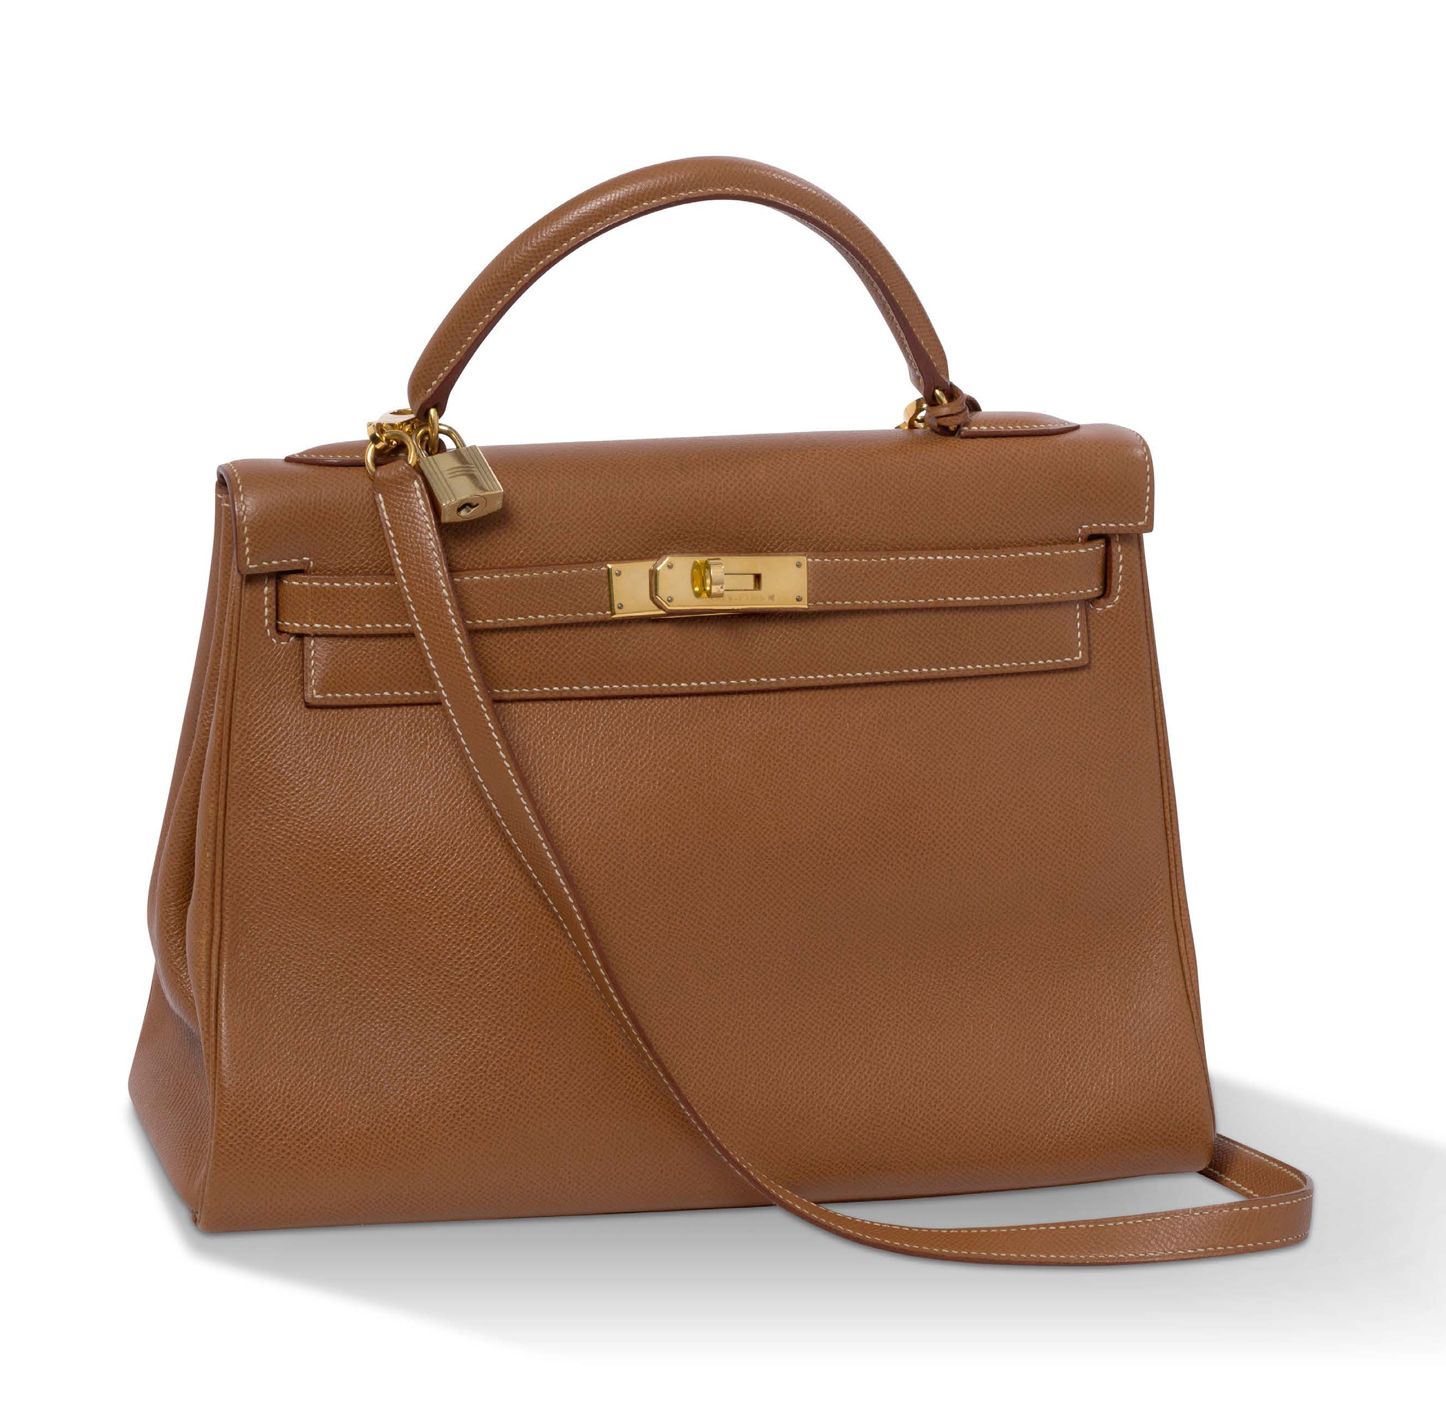 HERMÈS «Kelly», 1997 Borsa a mano in pelle Epsom Gold con cuciture bianche
Manic&hellip;